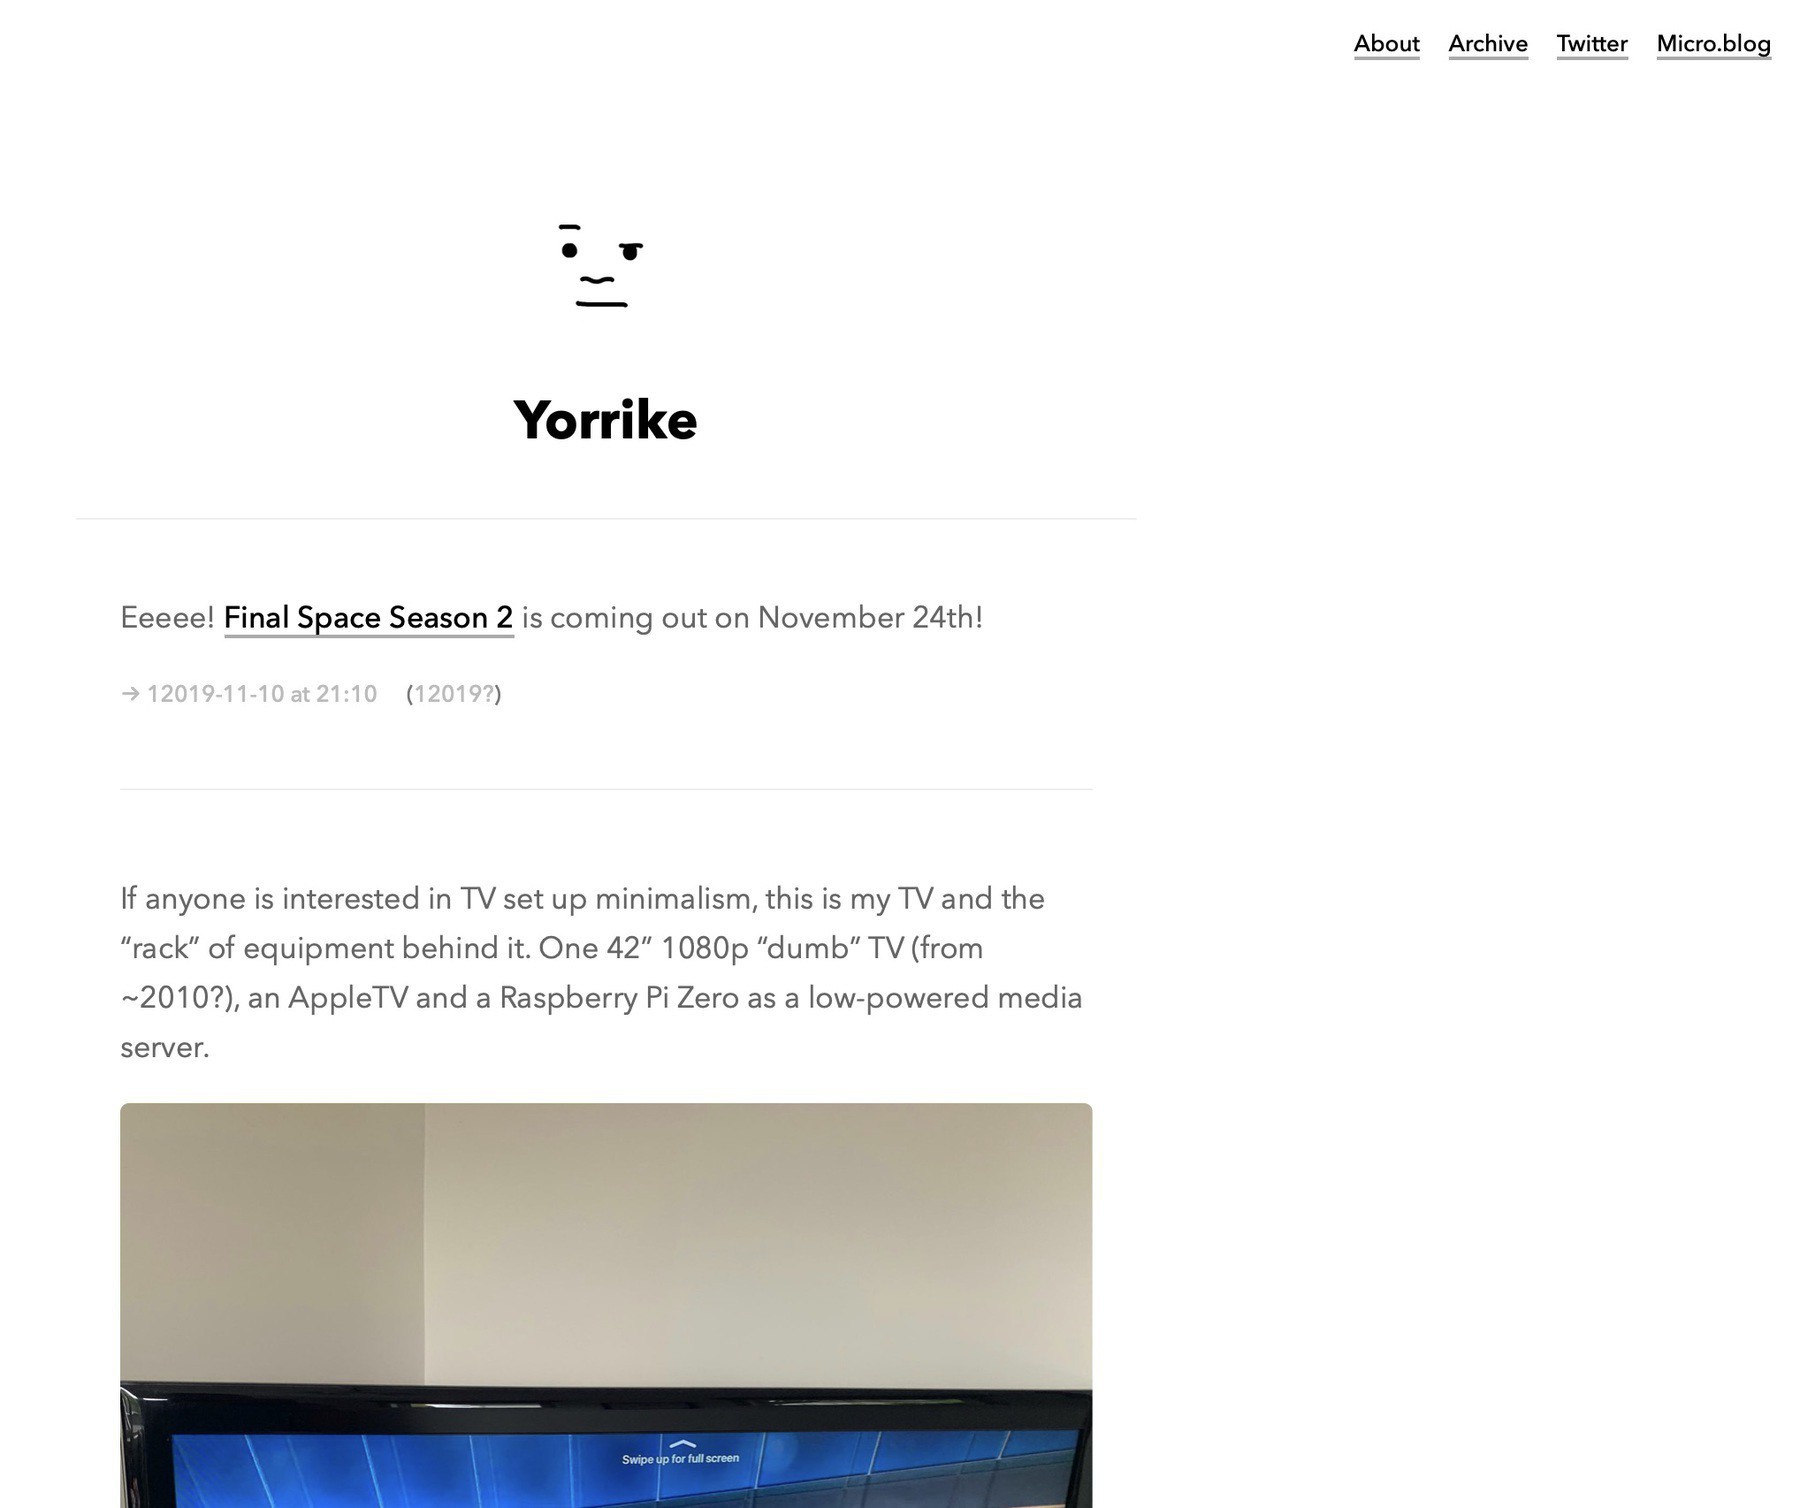 A screenshot of my website, with normal light mode - white background, dark text